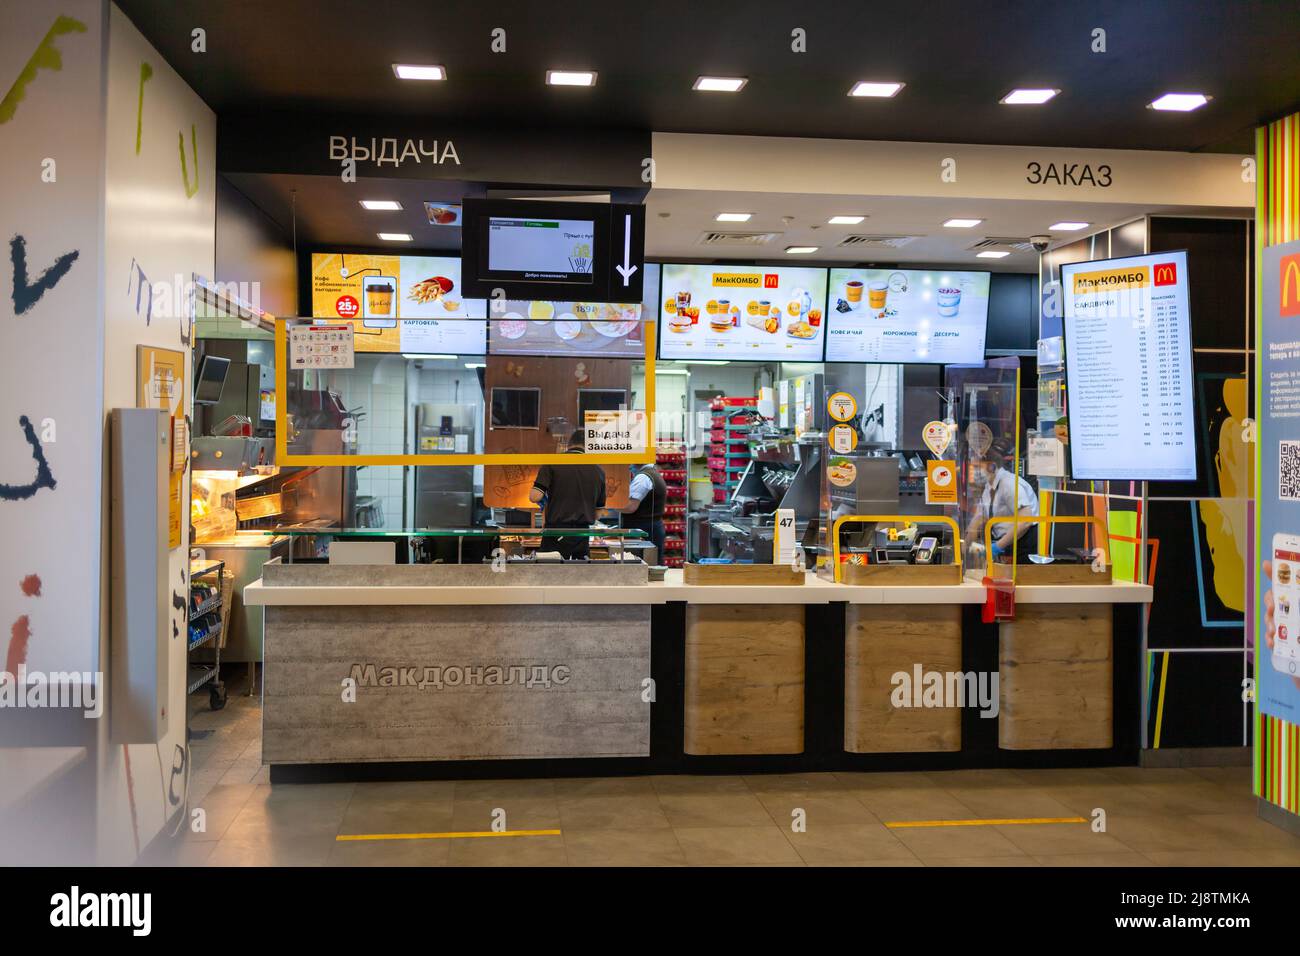 Moscow, Russia, April 1, 2022. McDonald's fast food restaurant in a mall. There are no customers in the restaurant, it is empty. The restaurant suspen Stock Photo